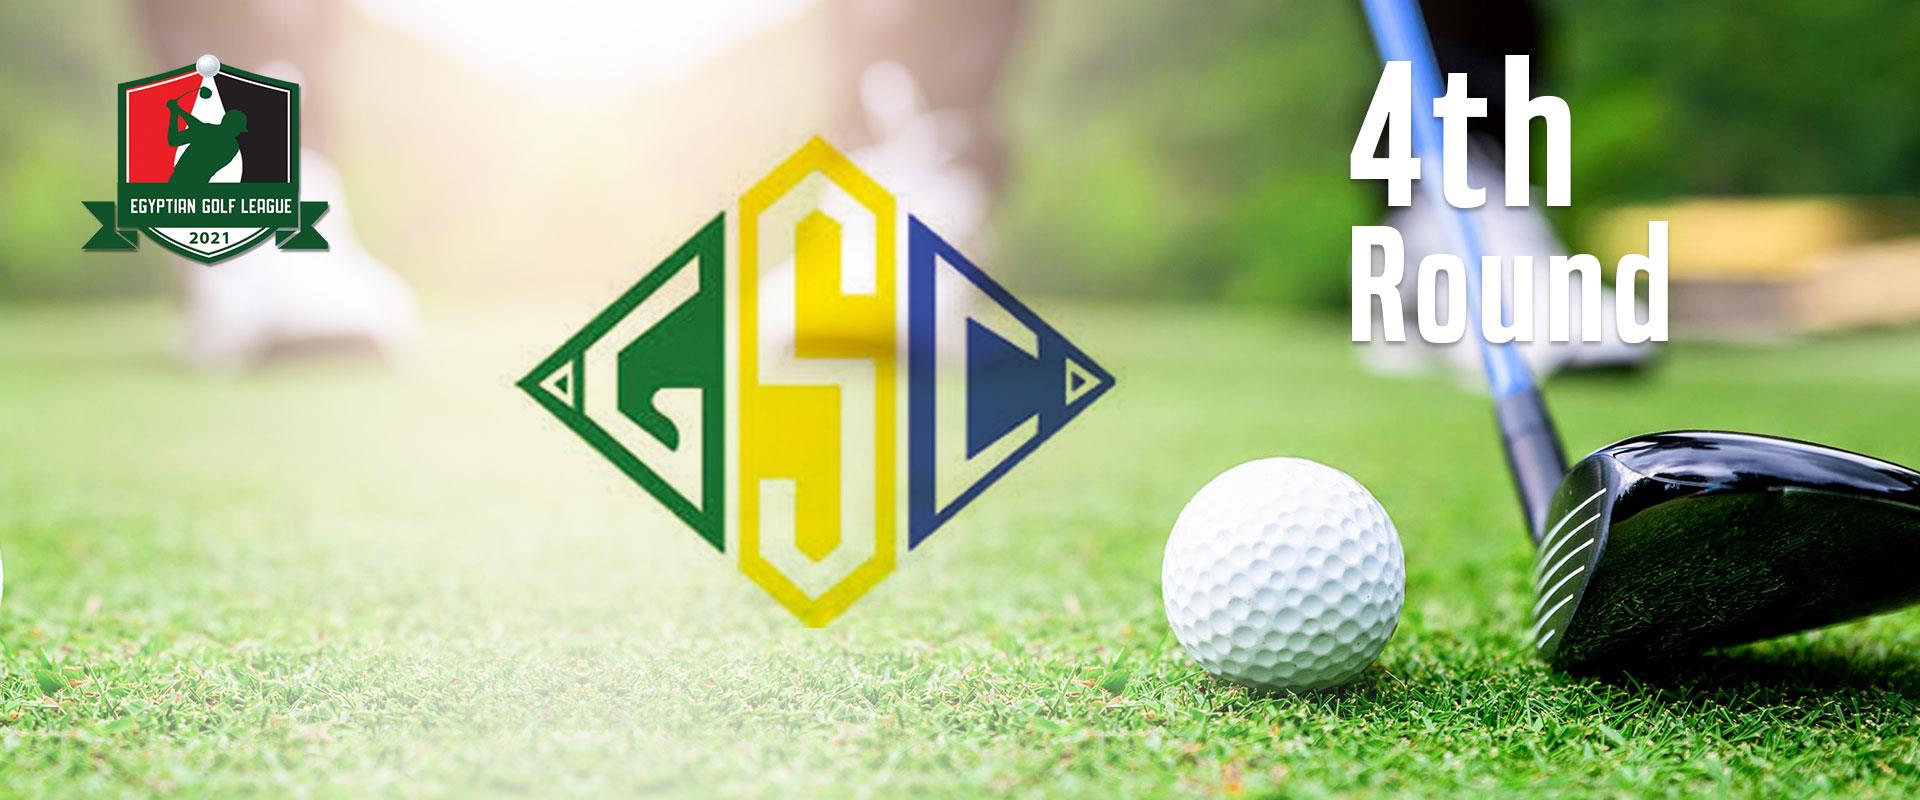 Gezira Sporting Club hosts the fourth round of the Egyptian Golf League